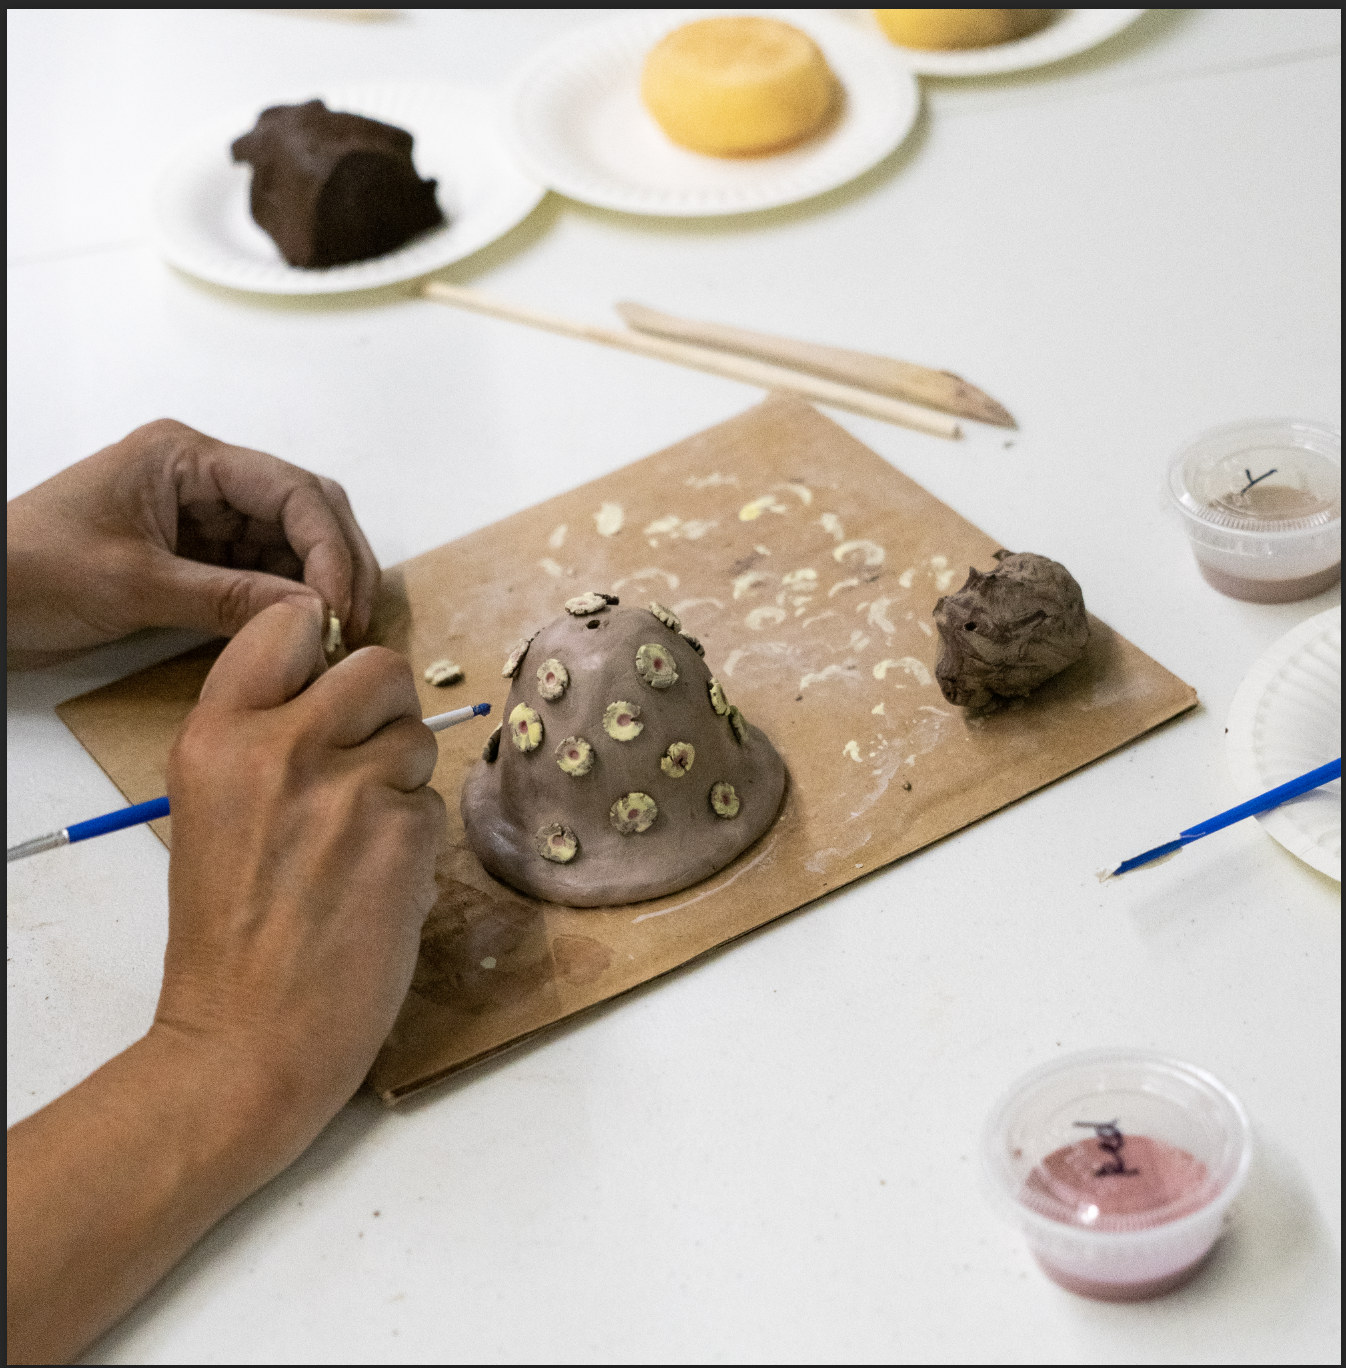 hands working with a brush and clay to make ceramic bells during the workshop